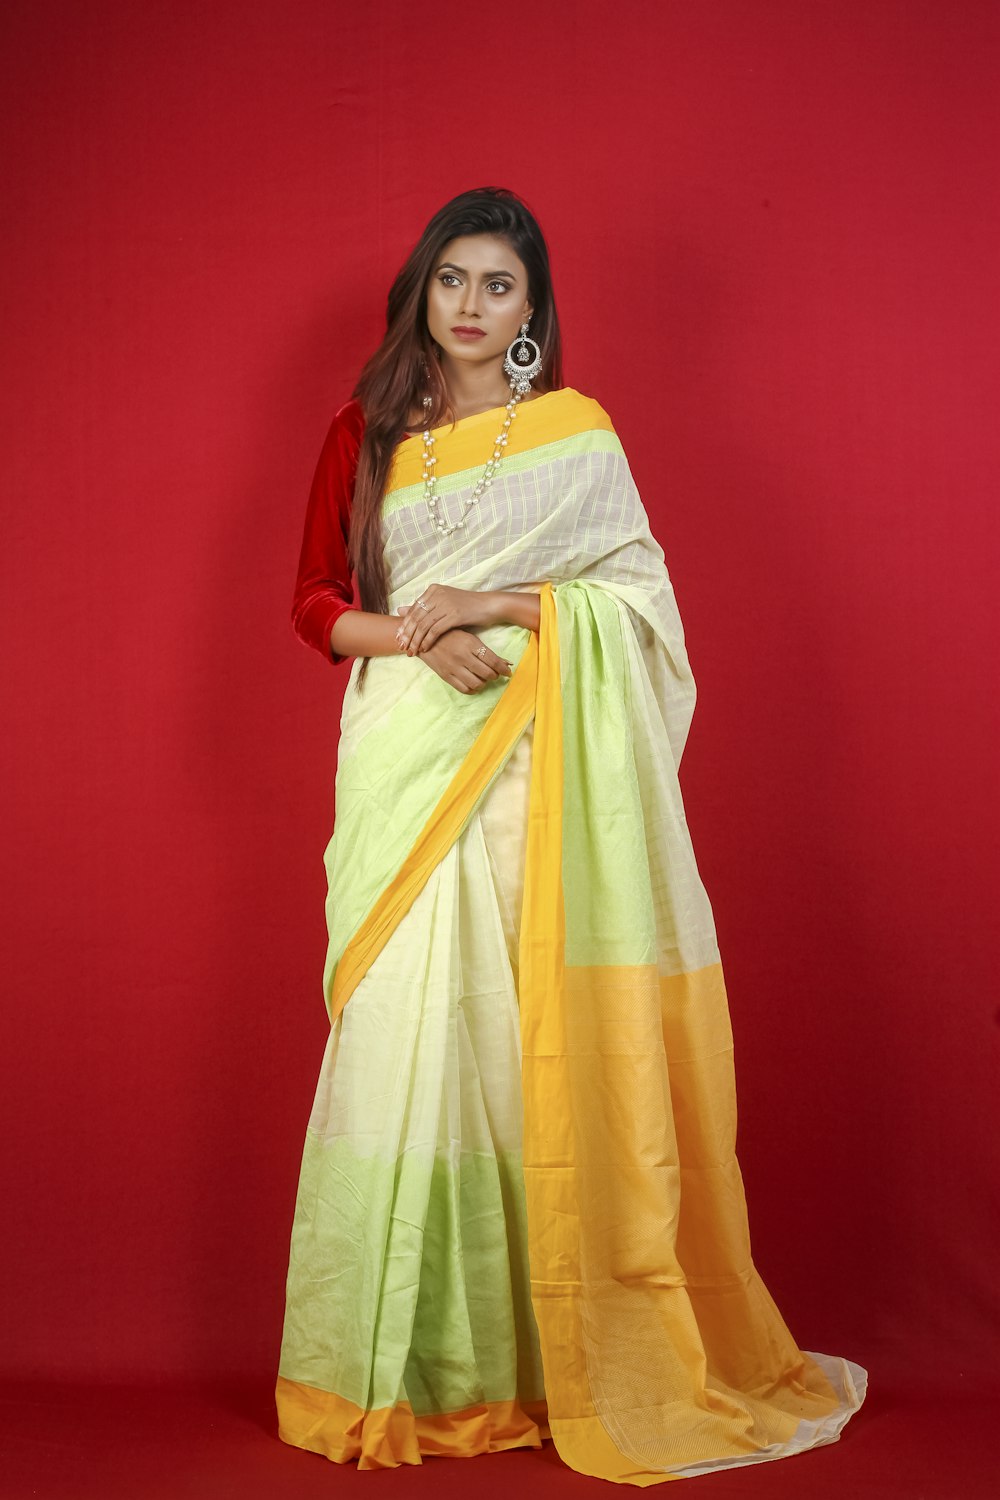 woman in red and yellow sari standing beside red wall